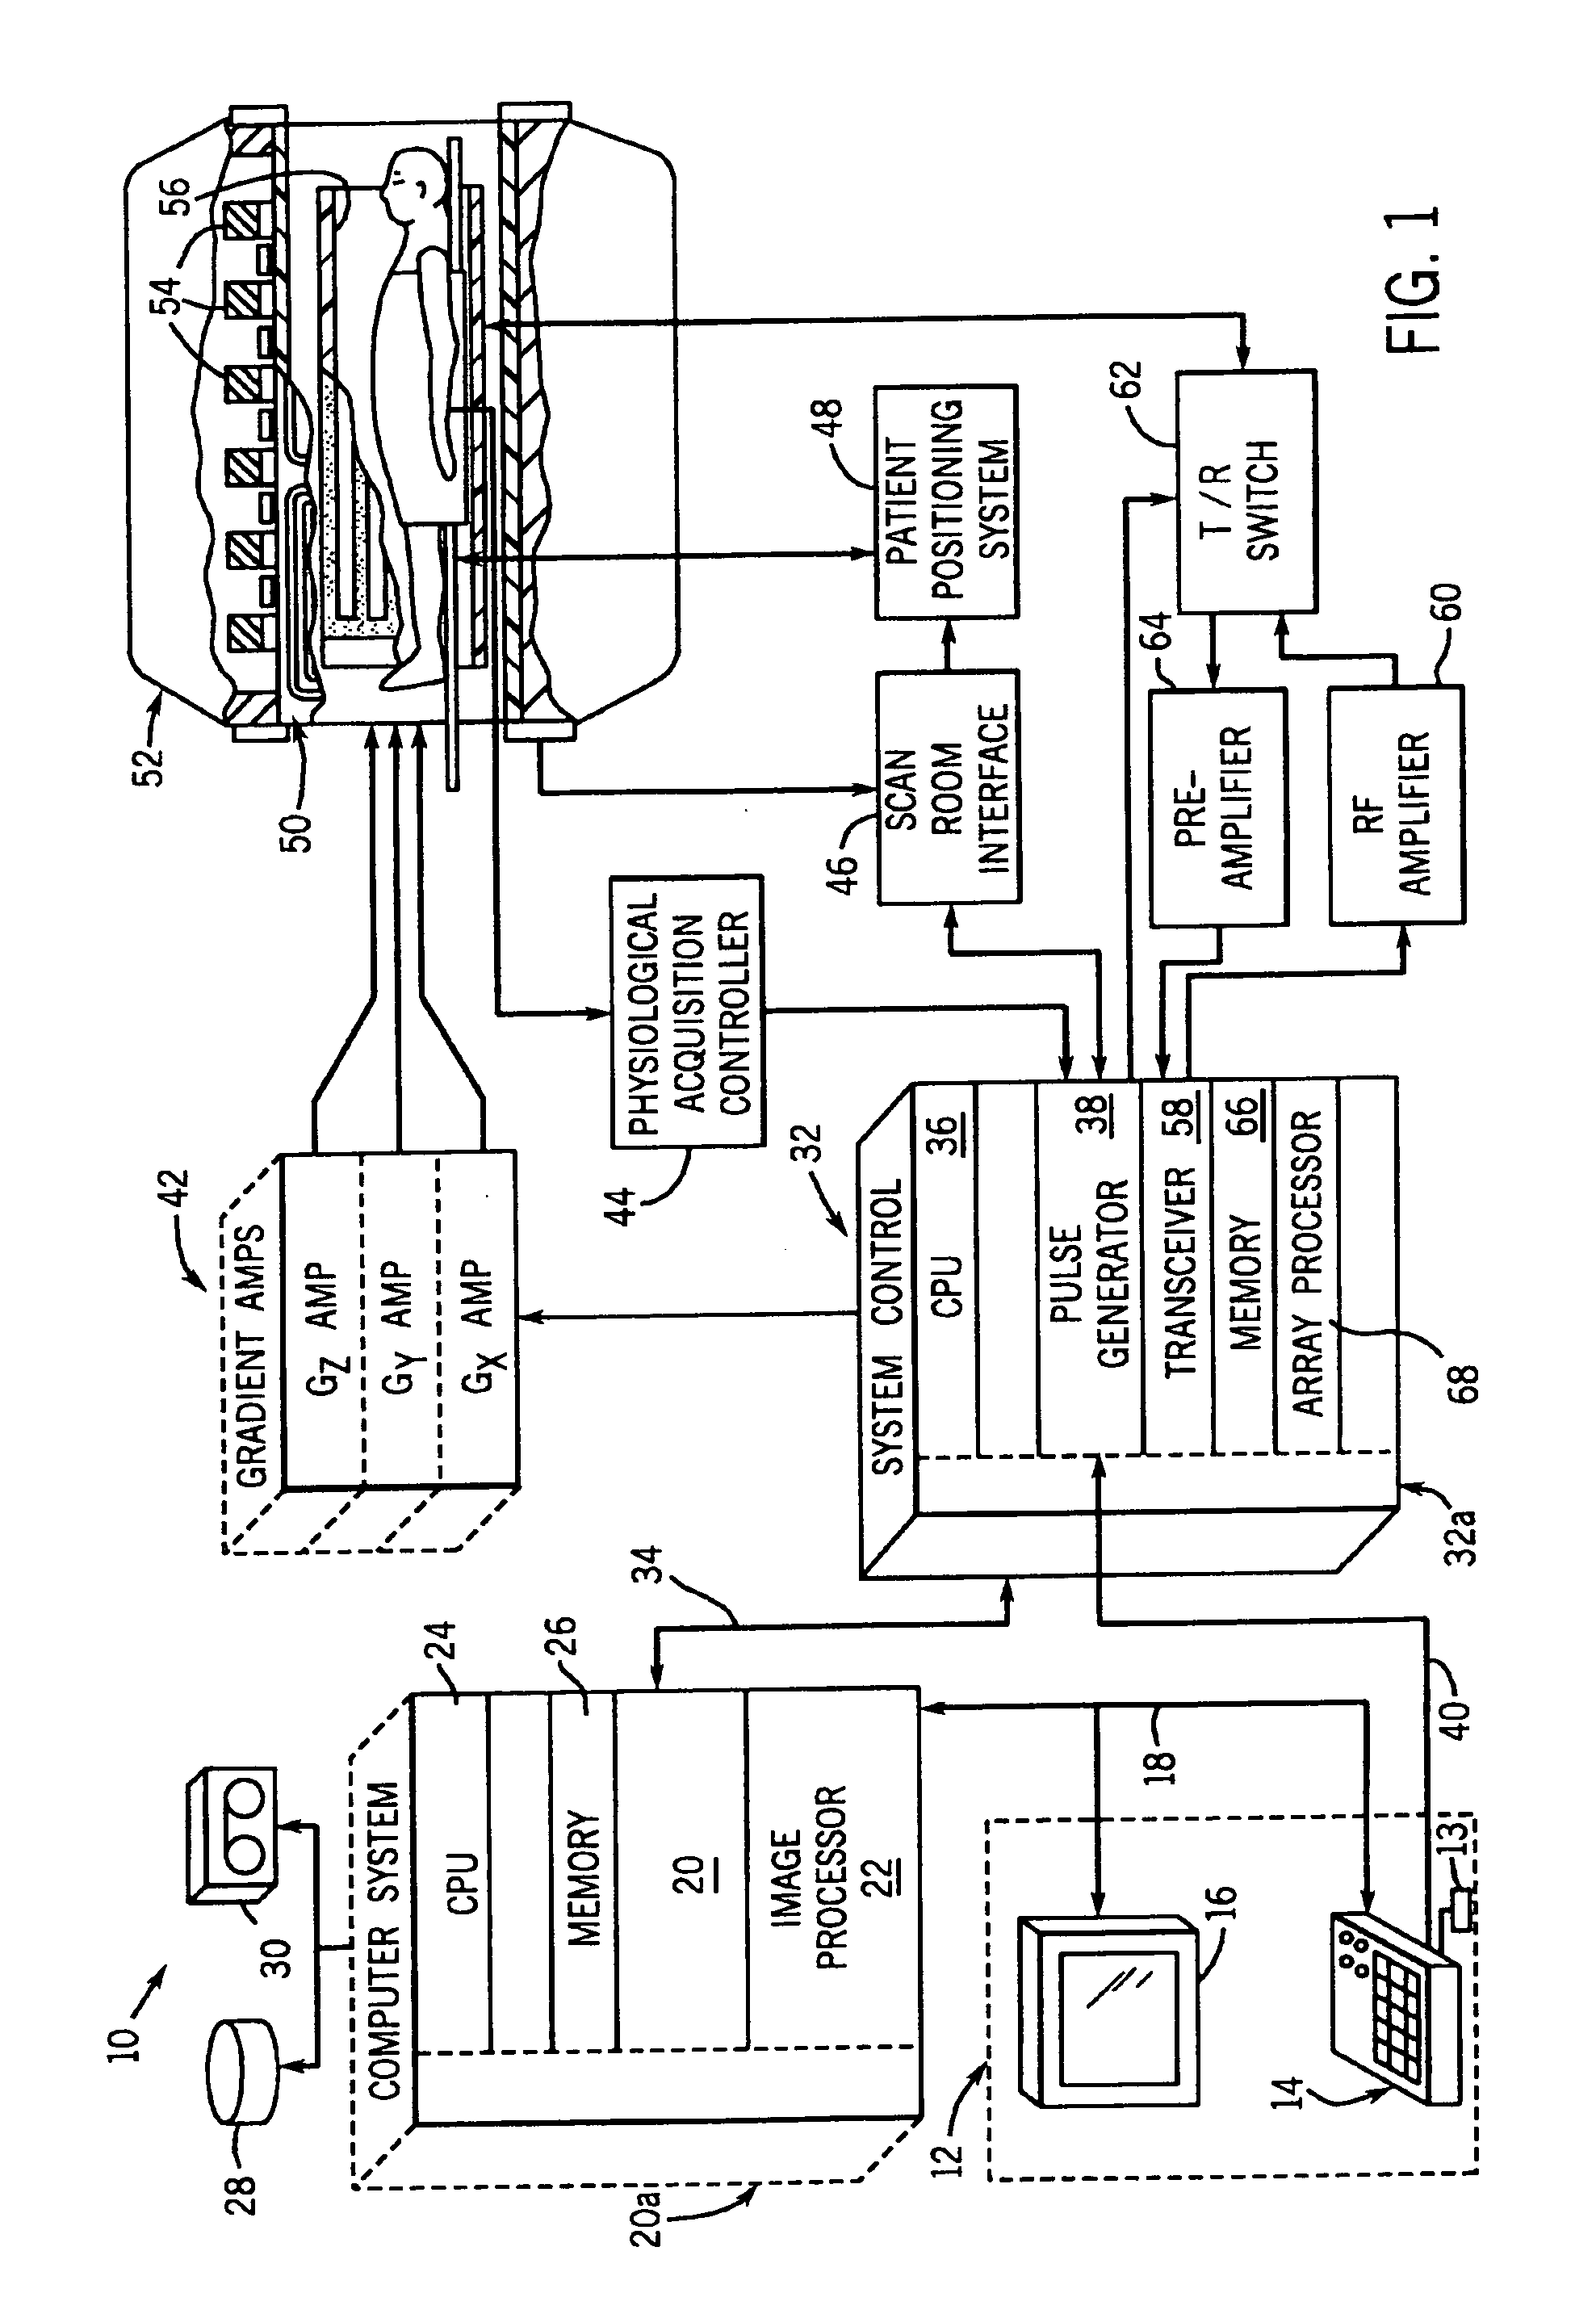 Method and system of MR imaging with reduced FSE cusp artifacts